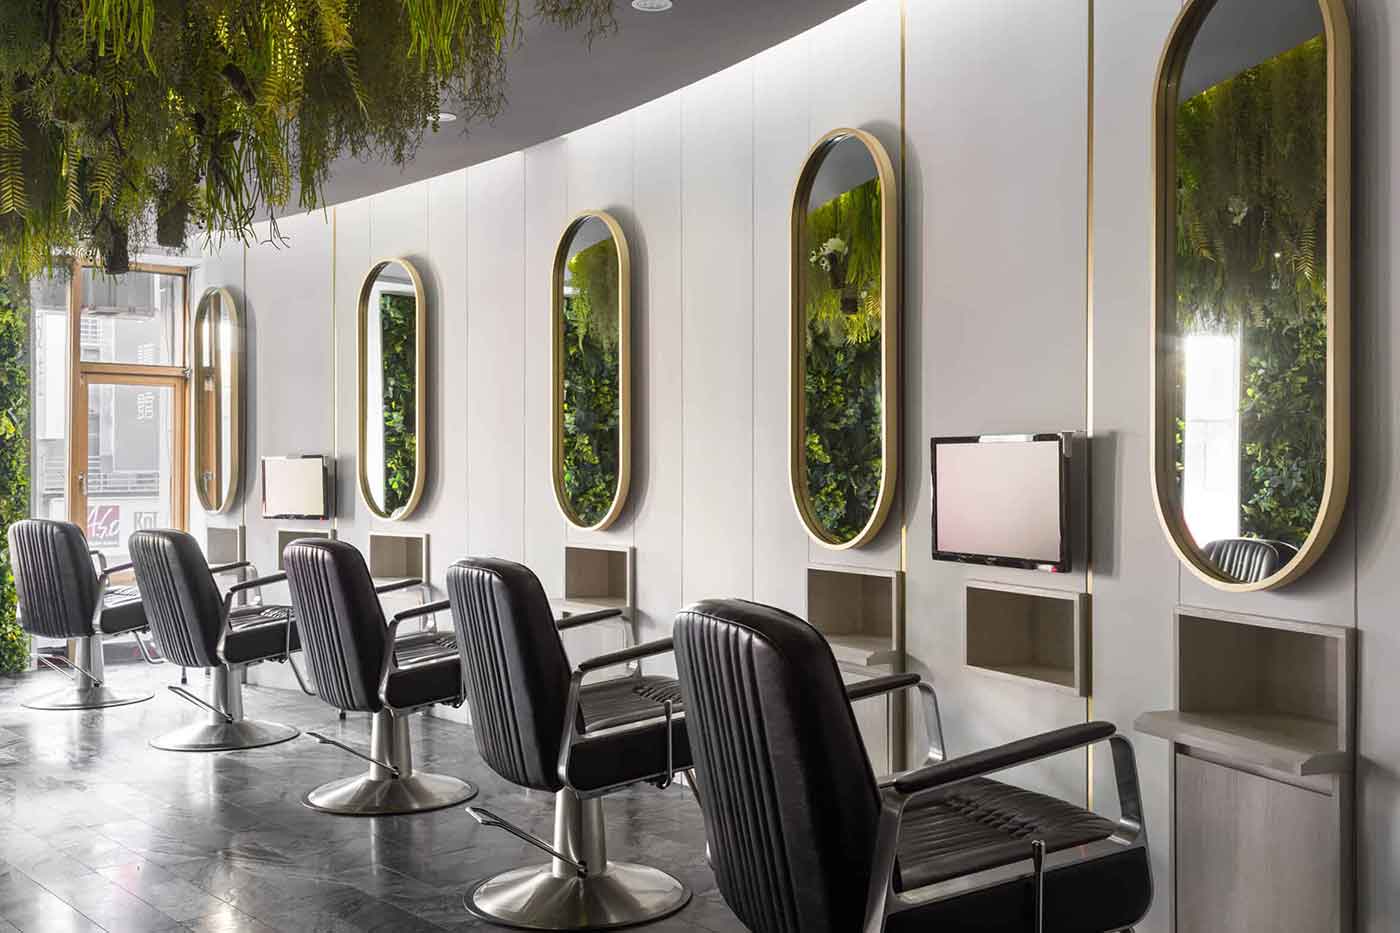 Sustainability in salons and its progress through the lens of the salon industry